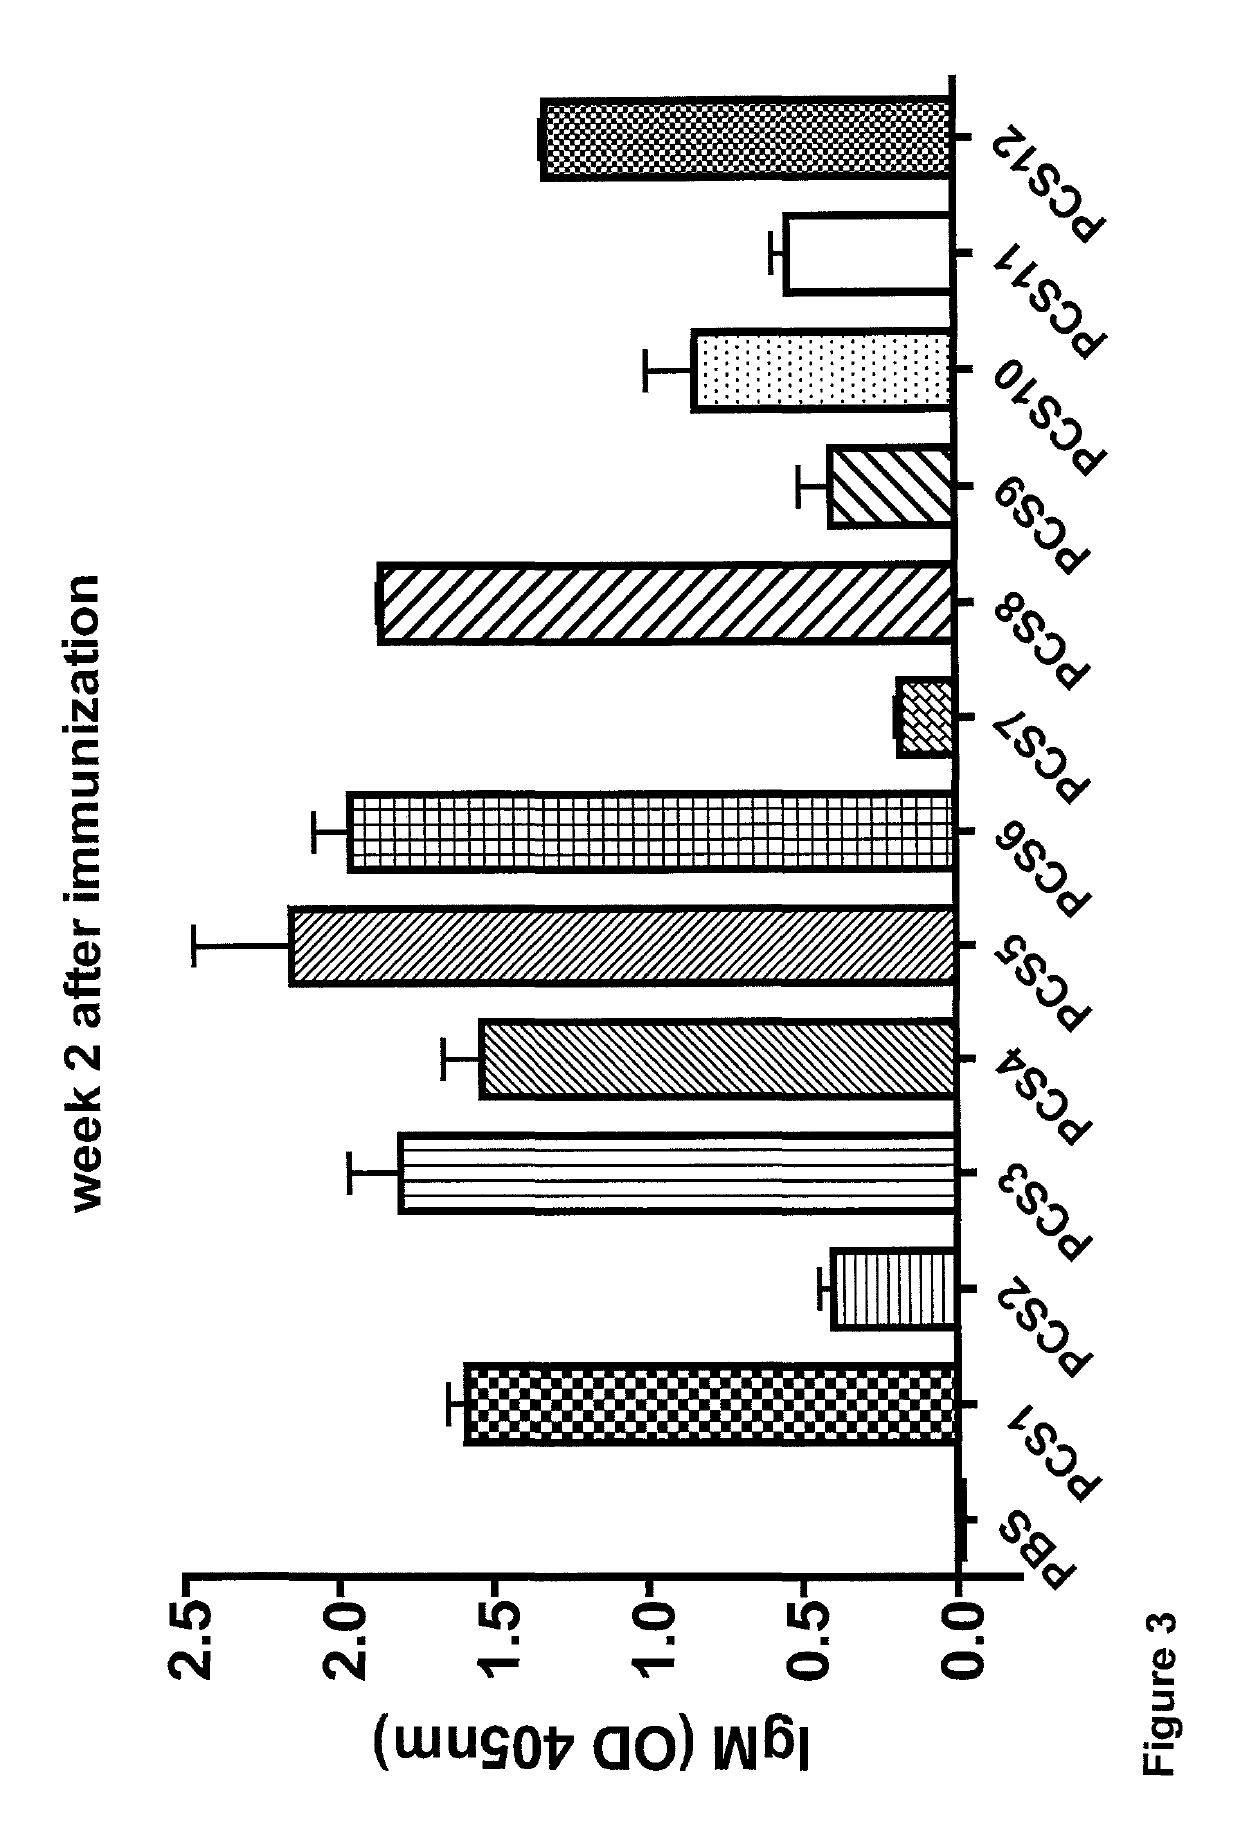 Methods of inducing an immune response against HIV by administering immunogenic peptides obtained from protease cleavage sites